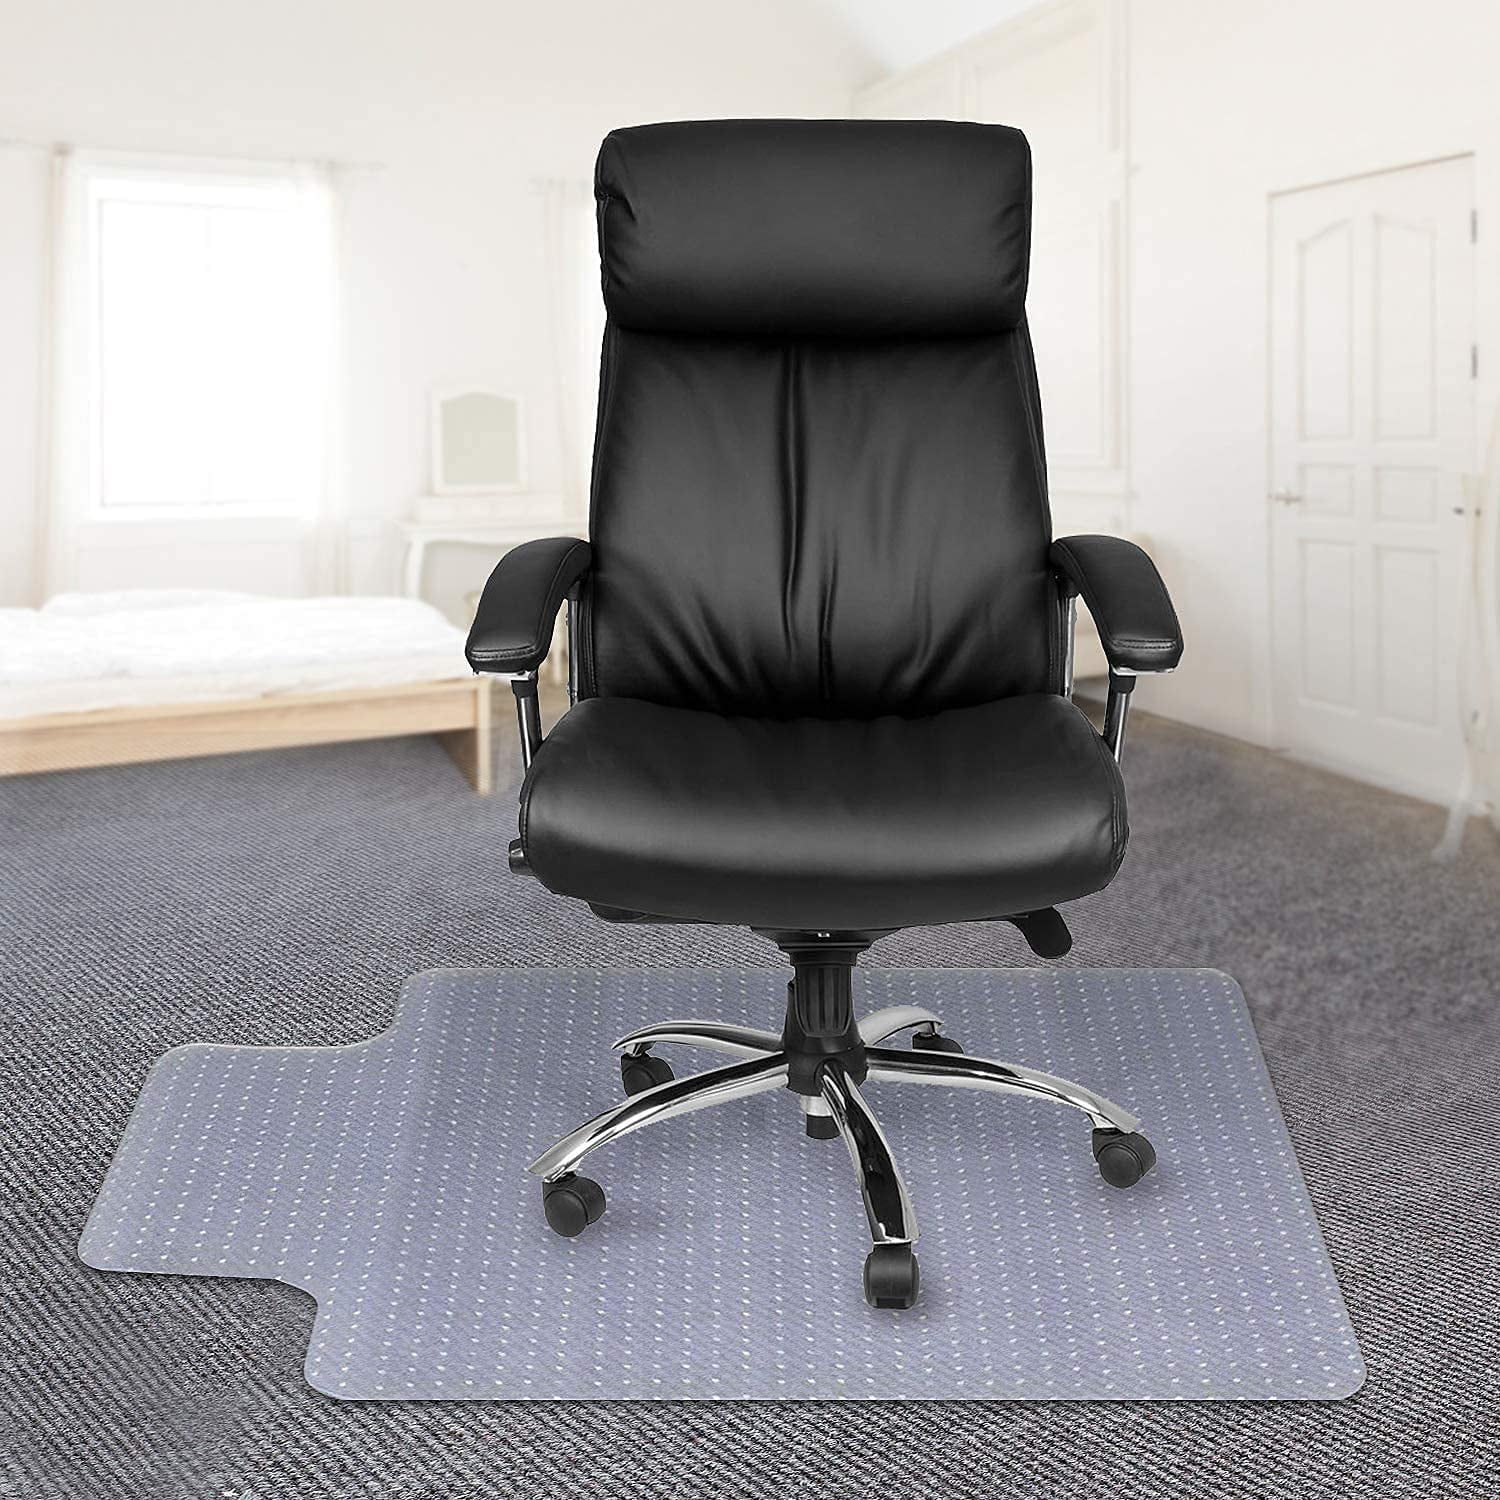 30 x 48 for Hard Floors Transparent Hard Floor Protector Shipped Flat FRUITEAM Rectangle Office Chair Mat 